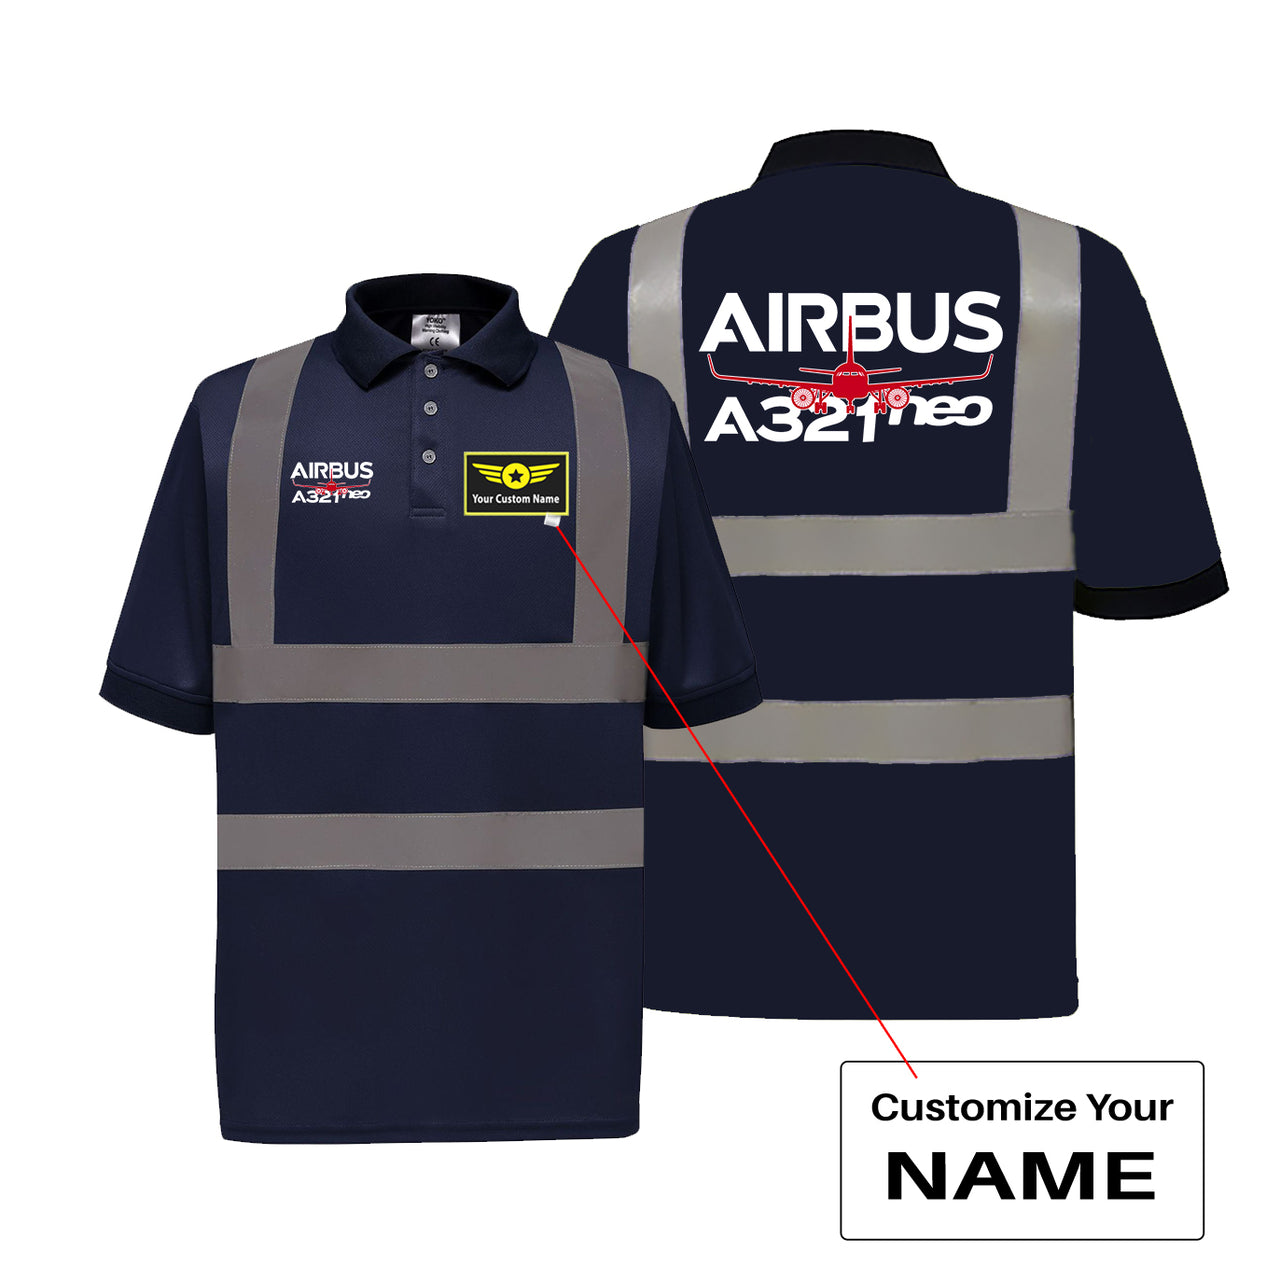 Amazing Airbus A321neo Designed Reflective Polo T-Shirts